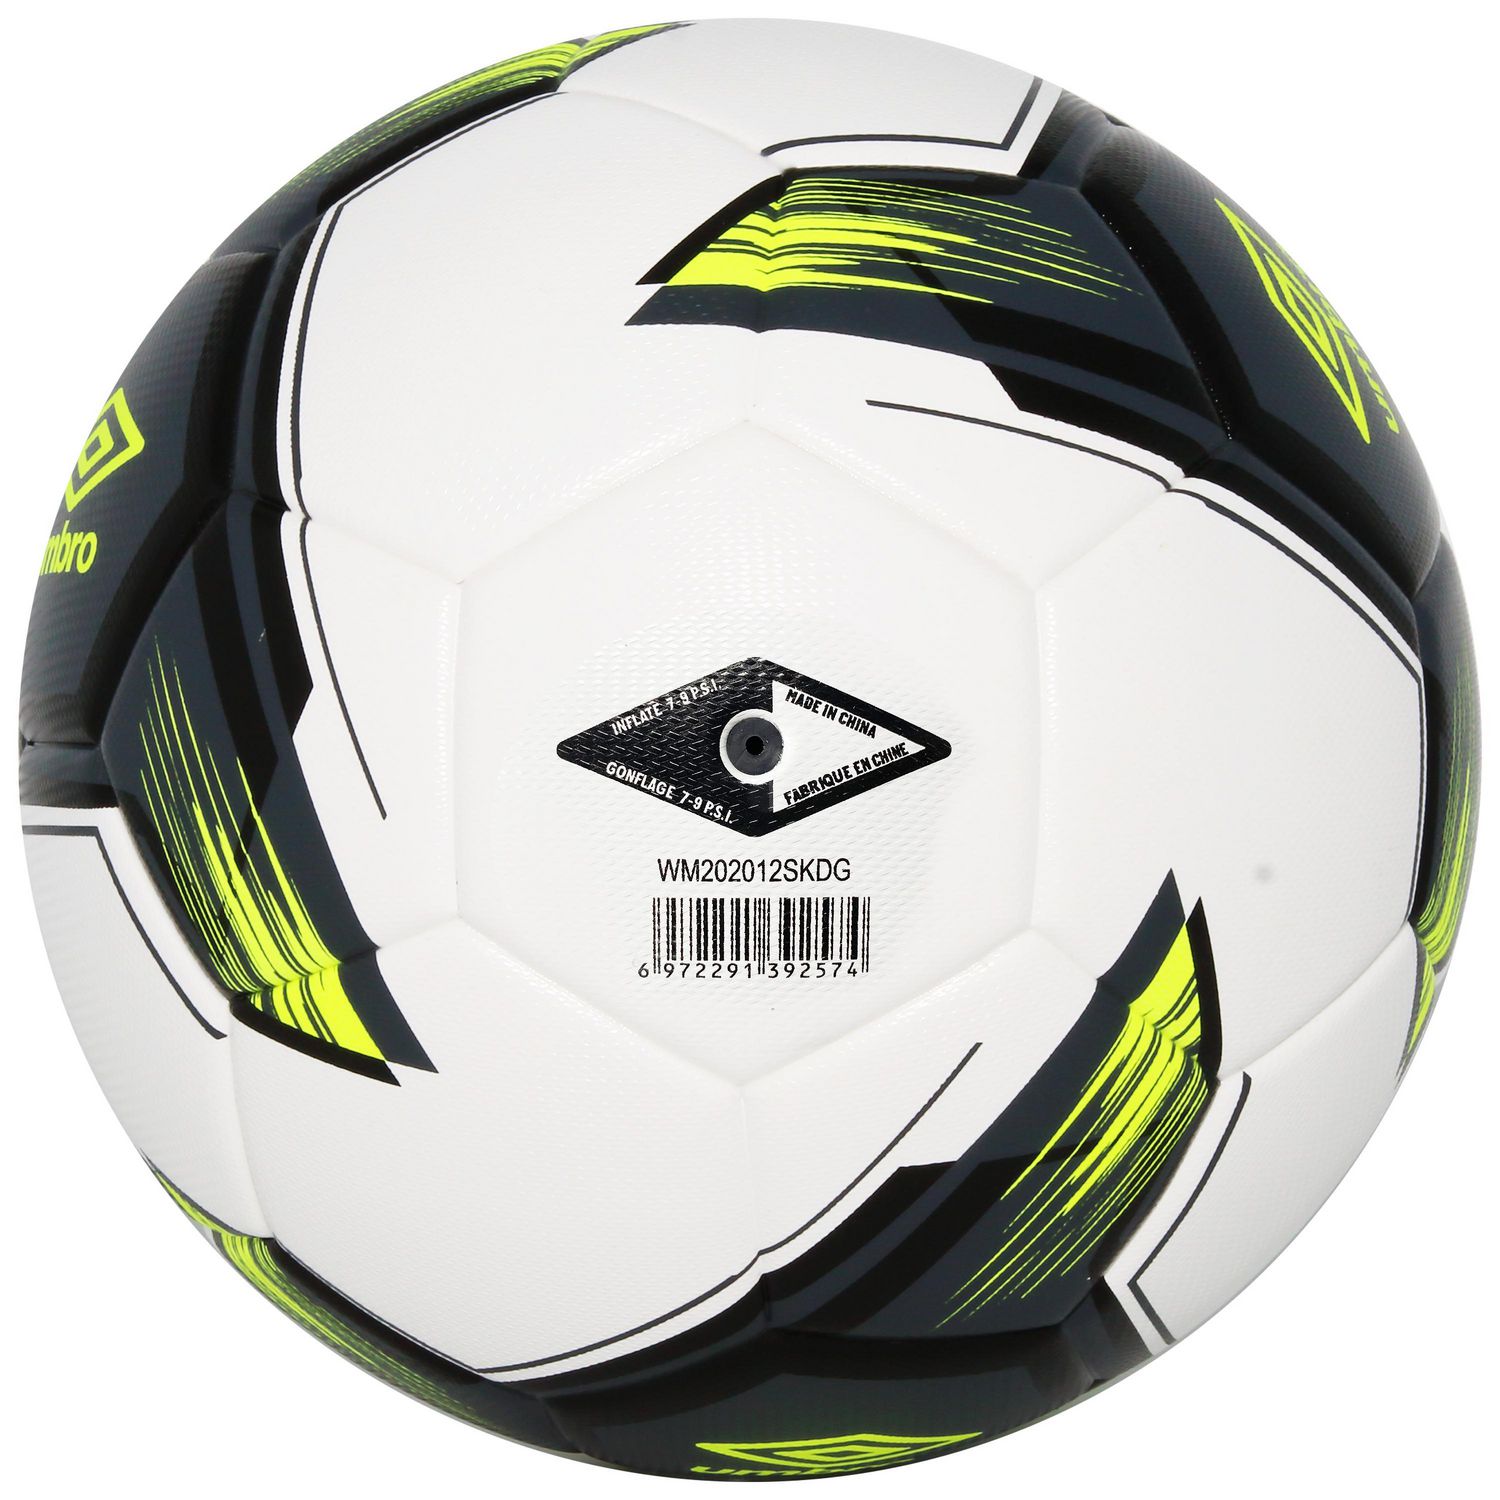 Umbro Tristar Soccer Ball, Available in sizes 4 and 5 - Walmart.ca